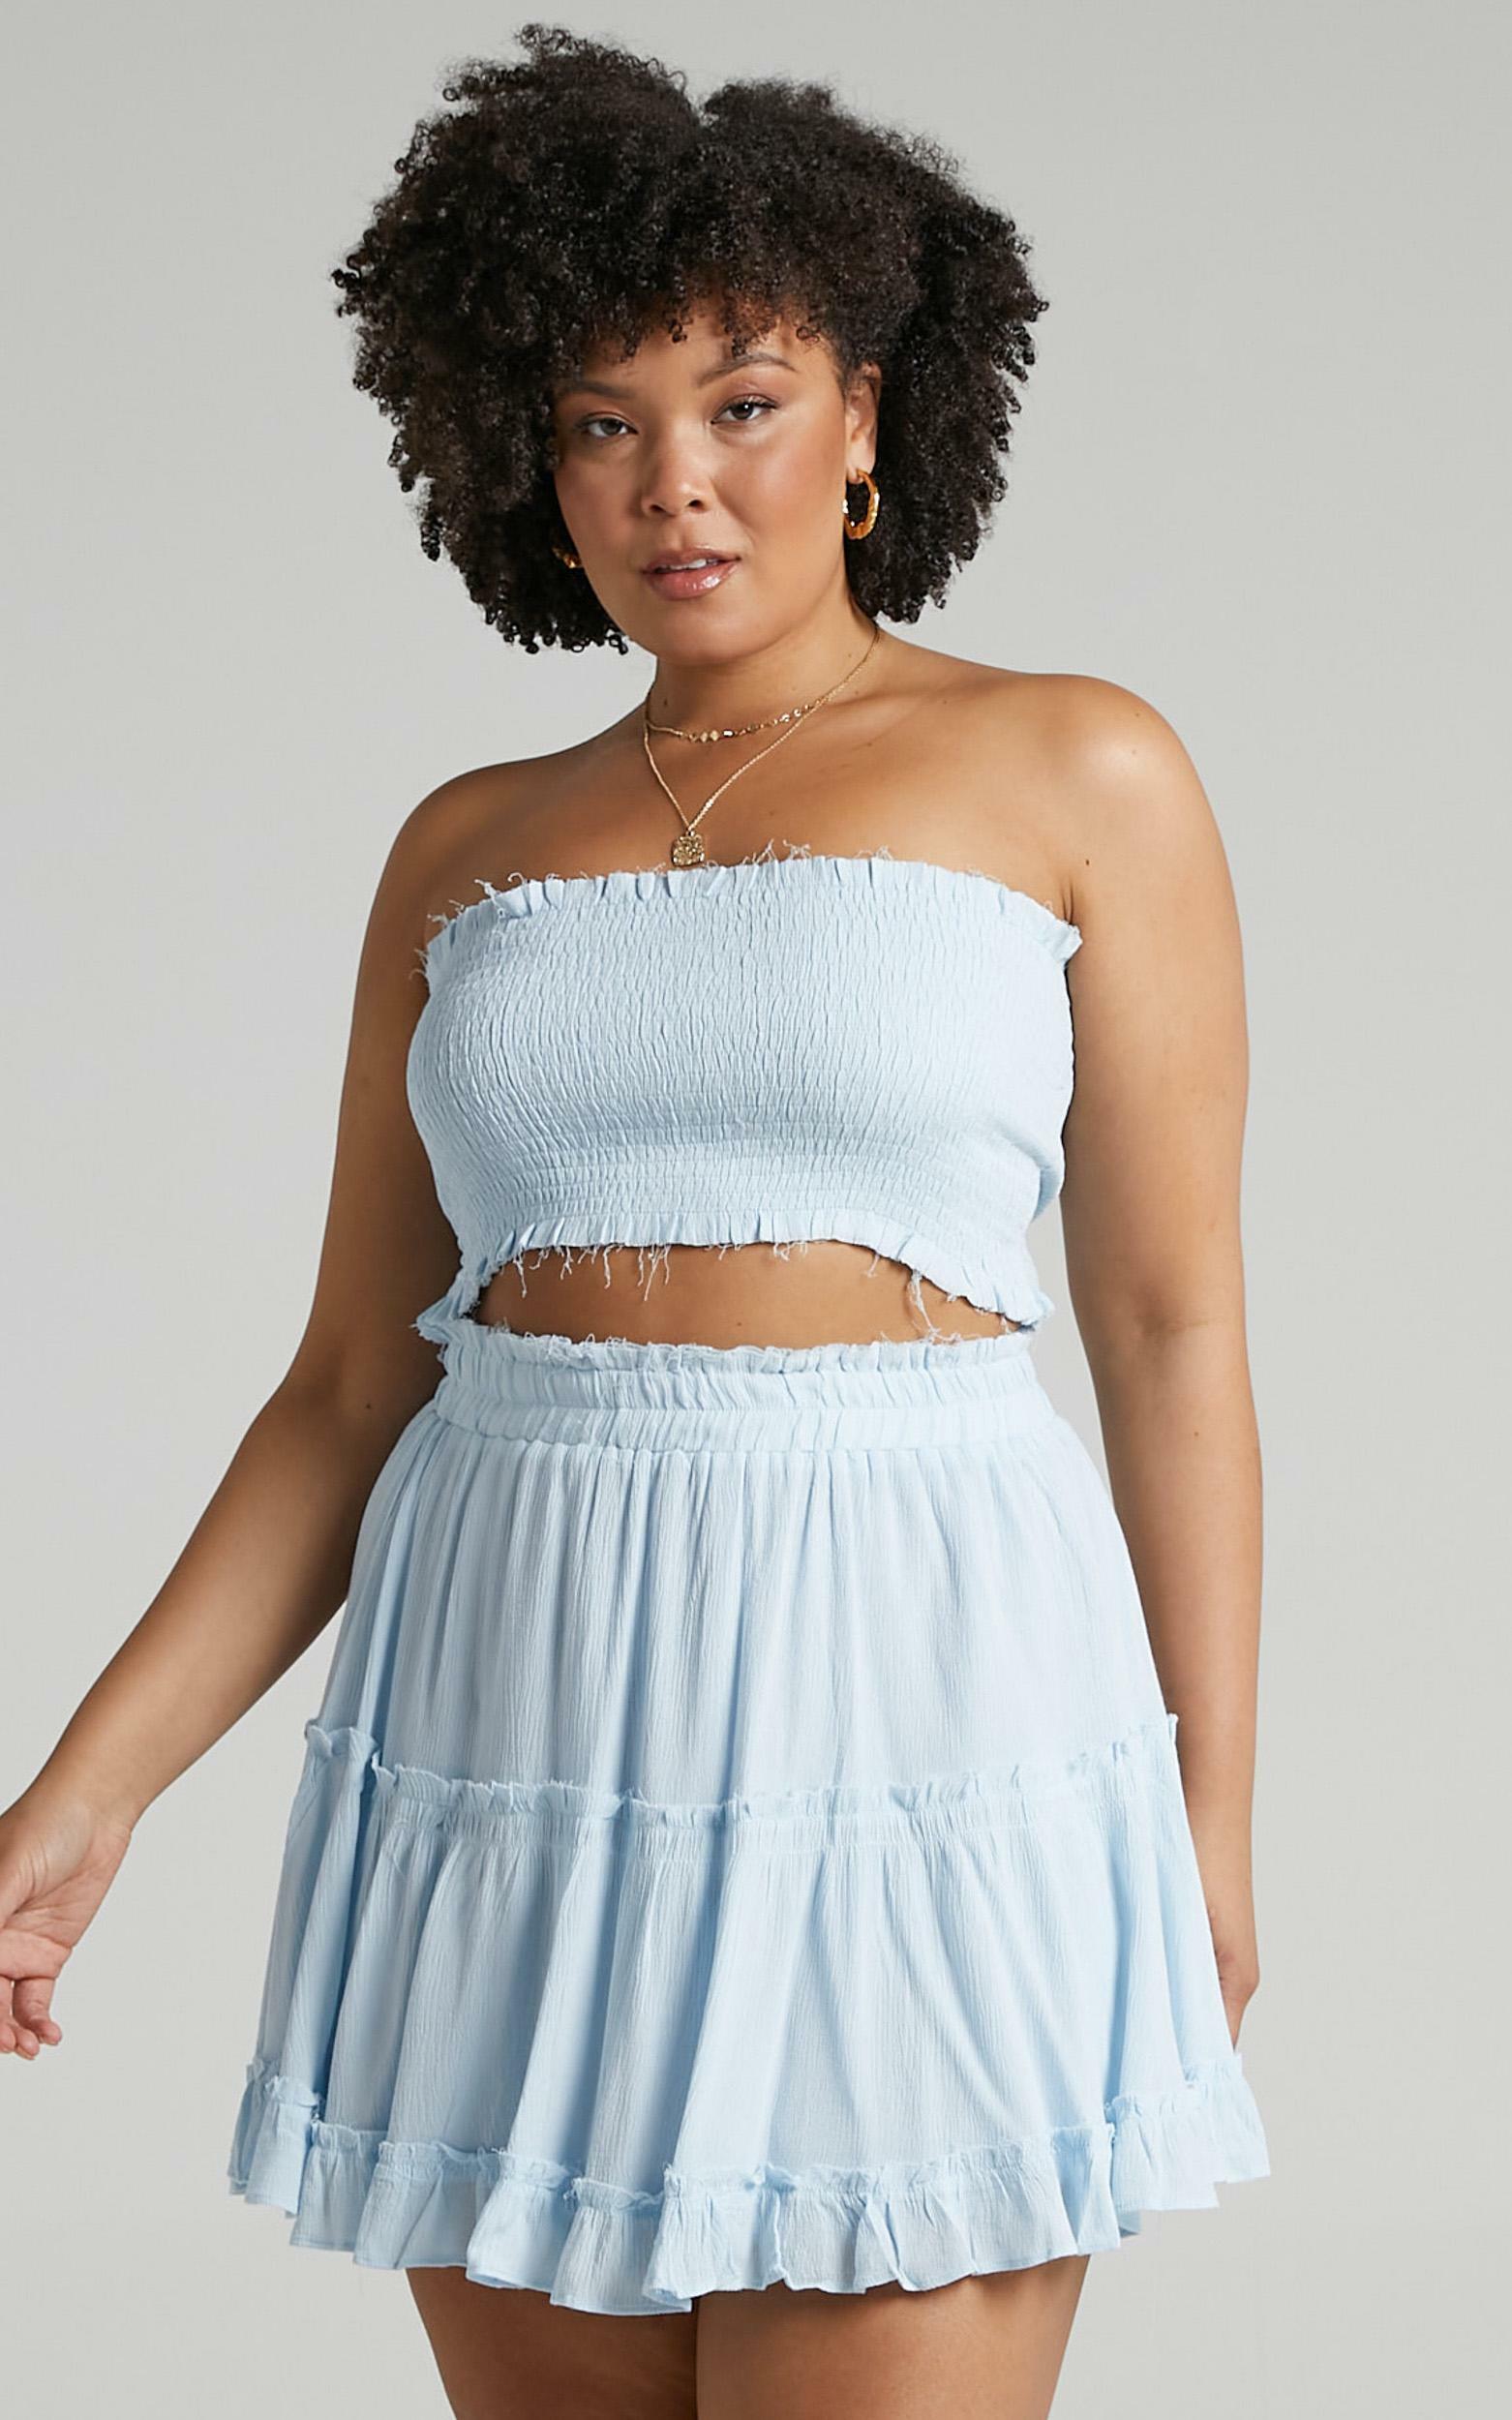 Outside the Line Two Piece Set in baby blue - 20 (XXXXL), Blue, hi-res image number null